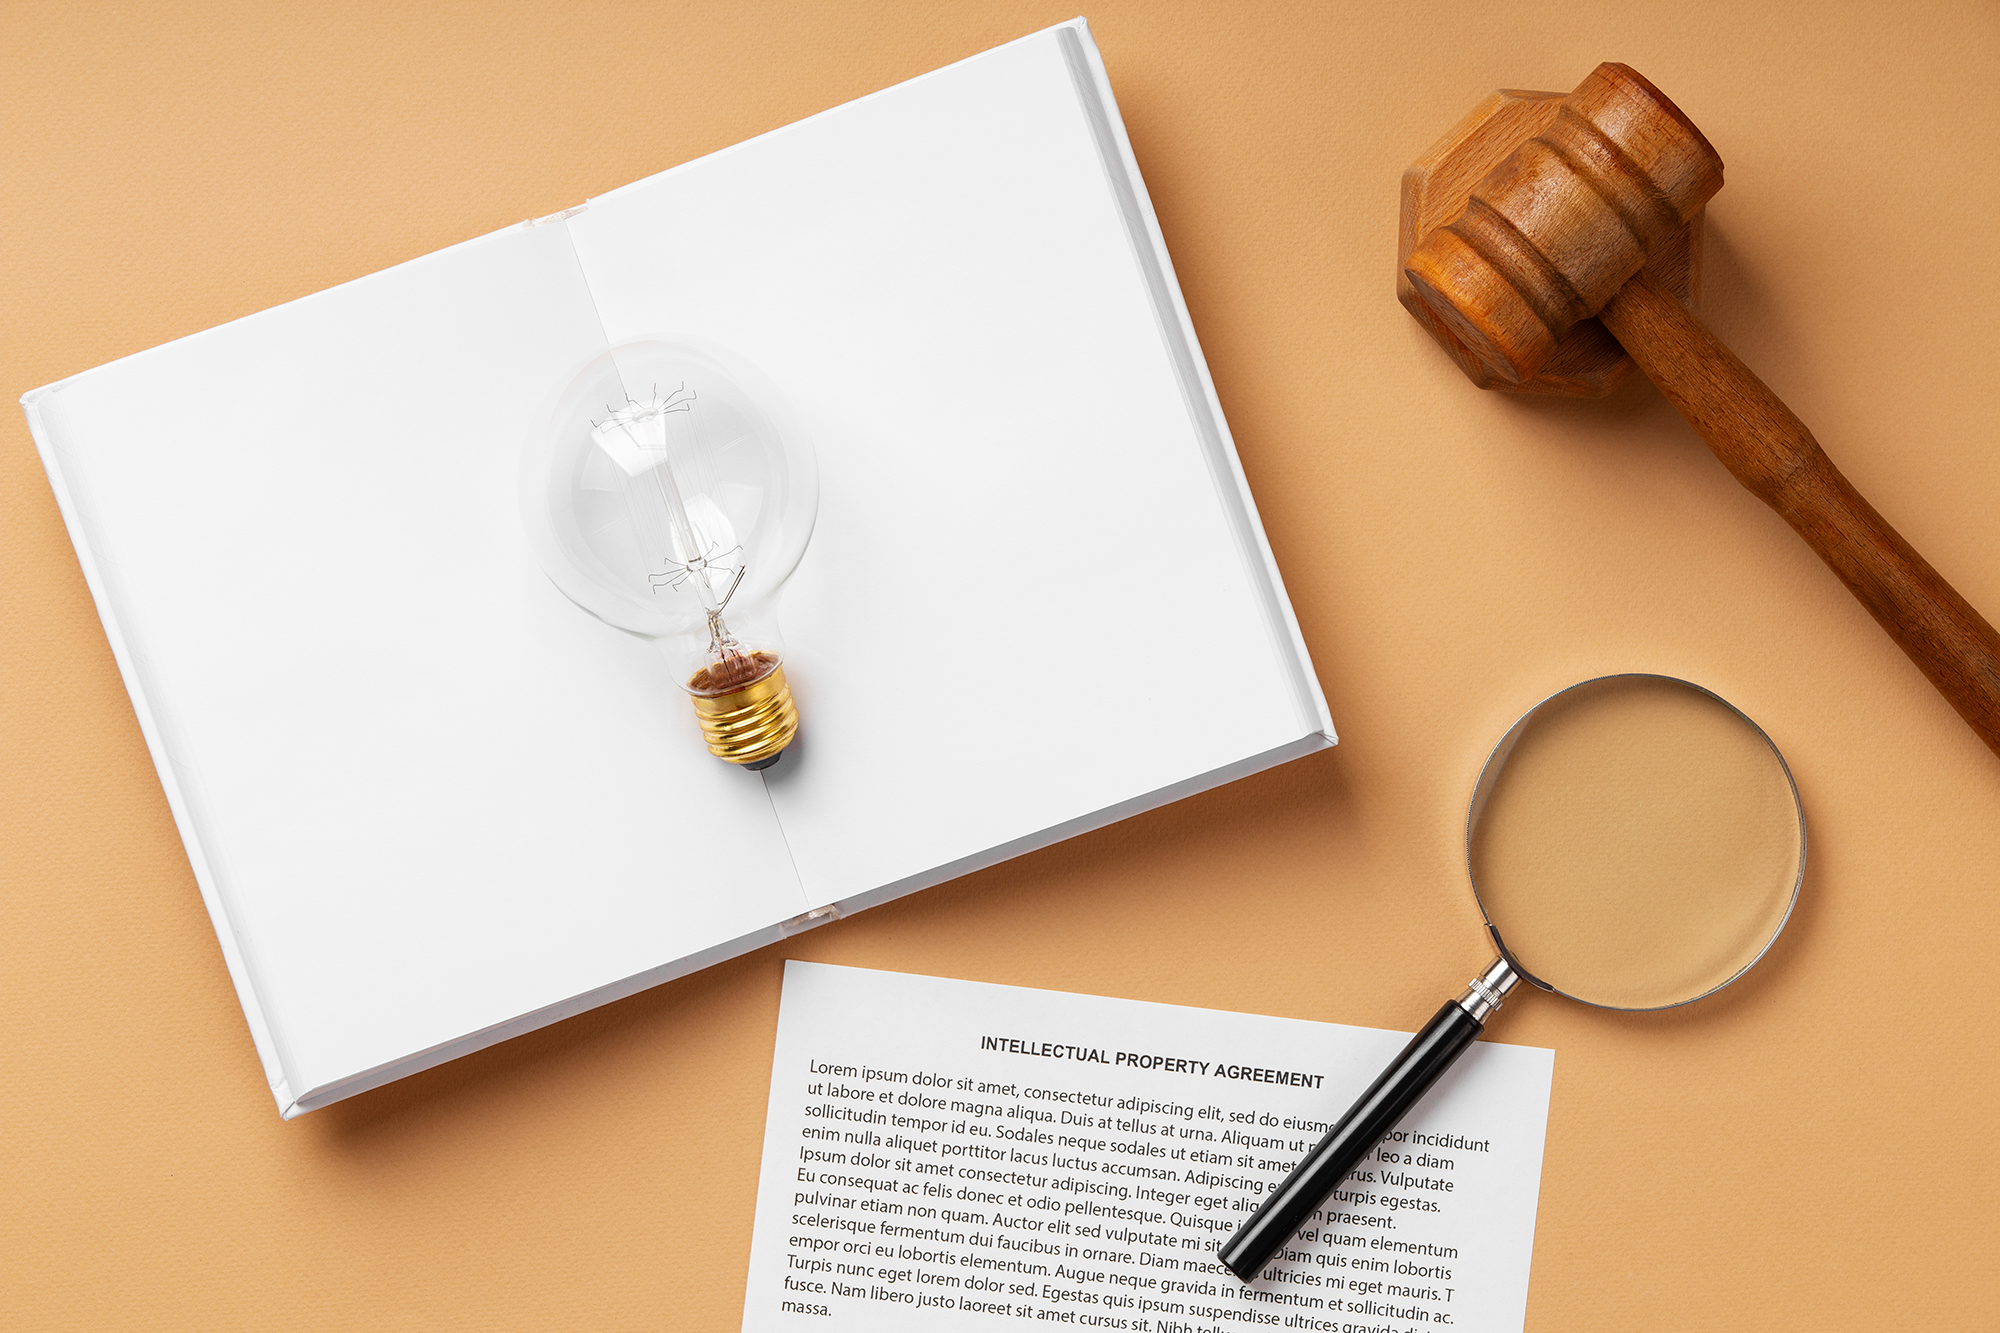 Items on a flat surface such as lightbulb on an open book, magnifying glass, and gavel